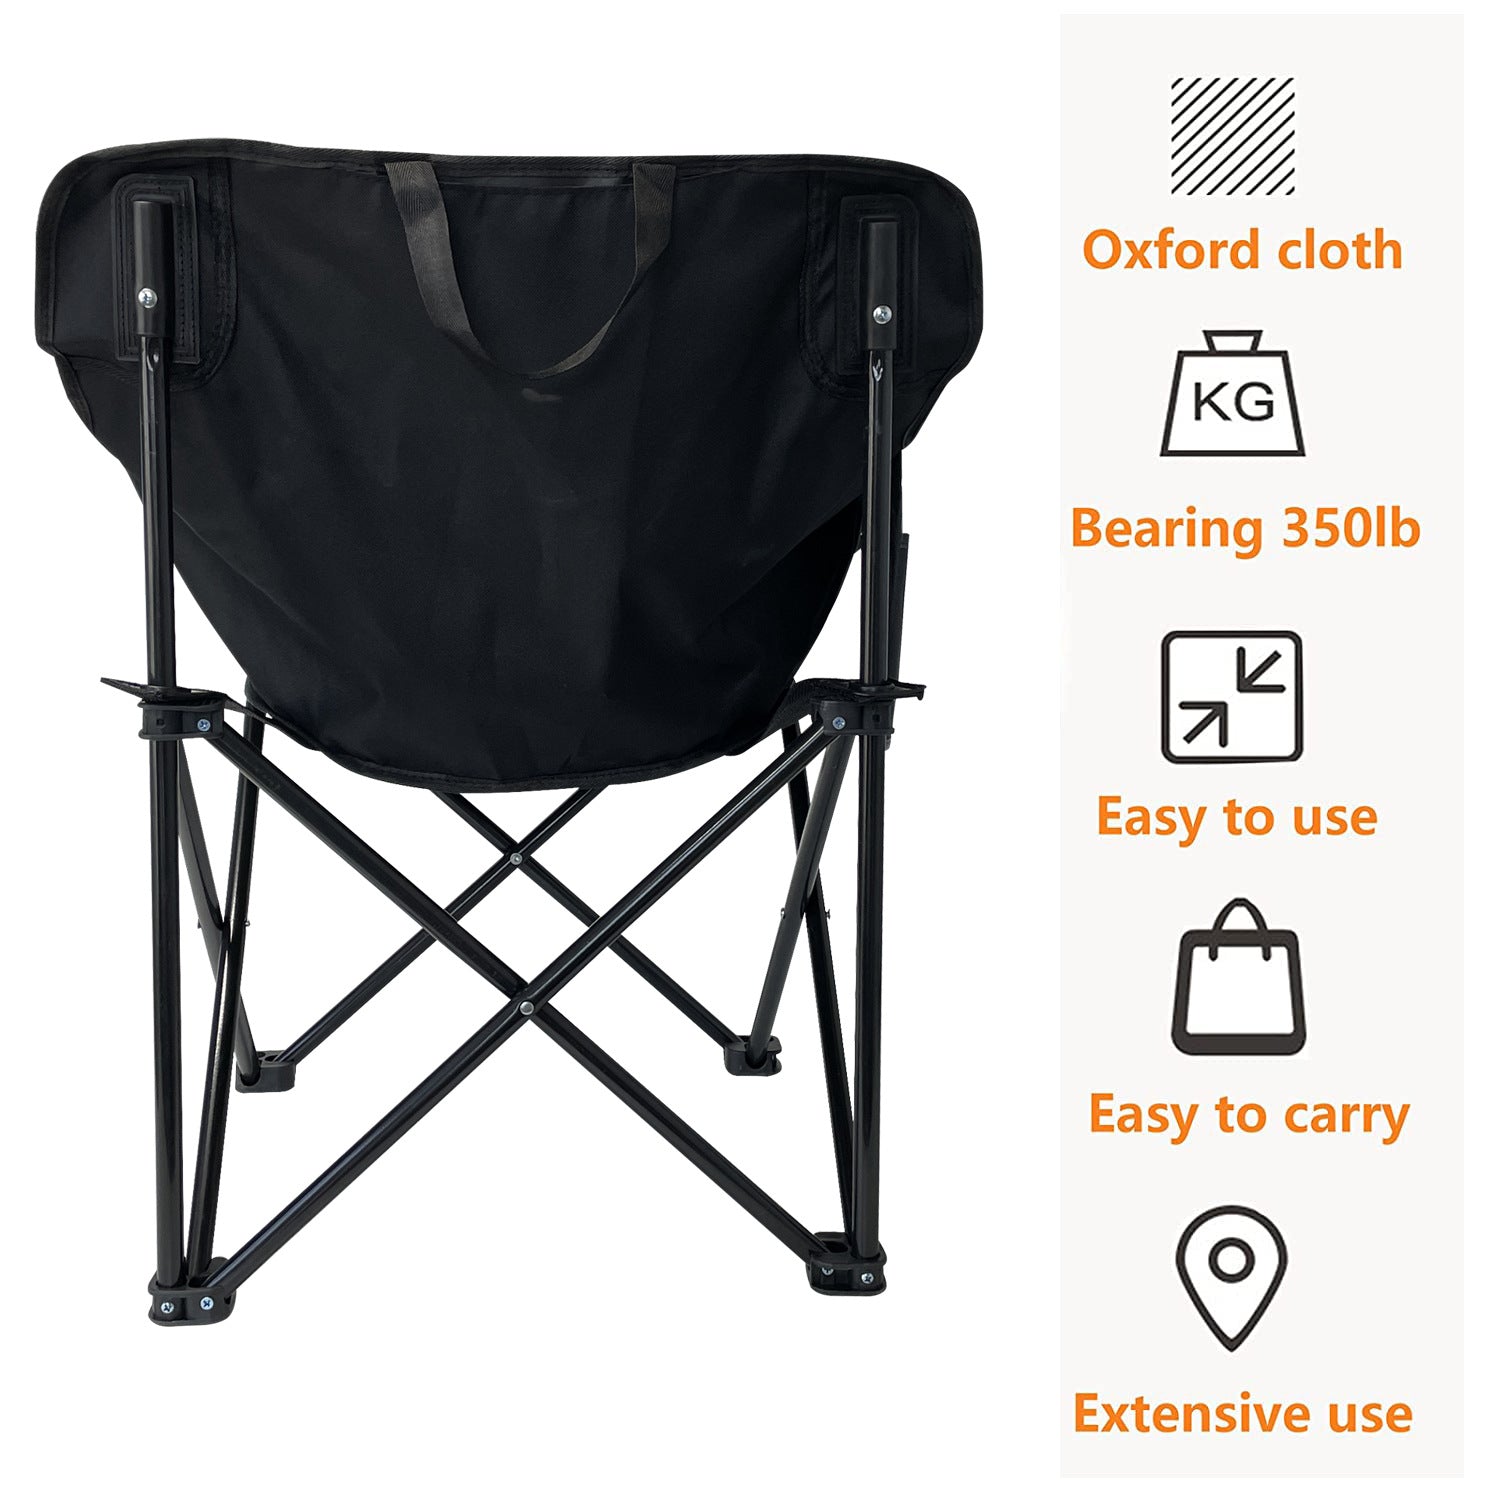 Black Oxford Versatile Moon Chair Portable For Outdoor And Indoor Use Features